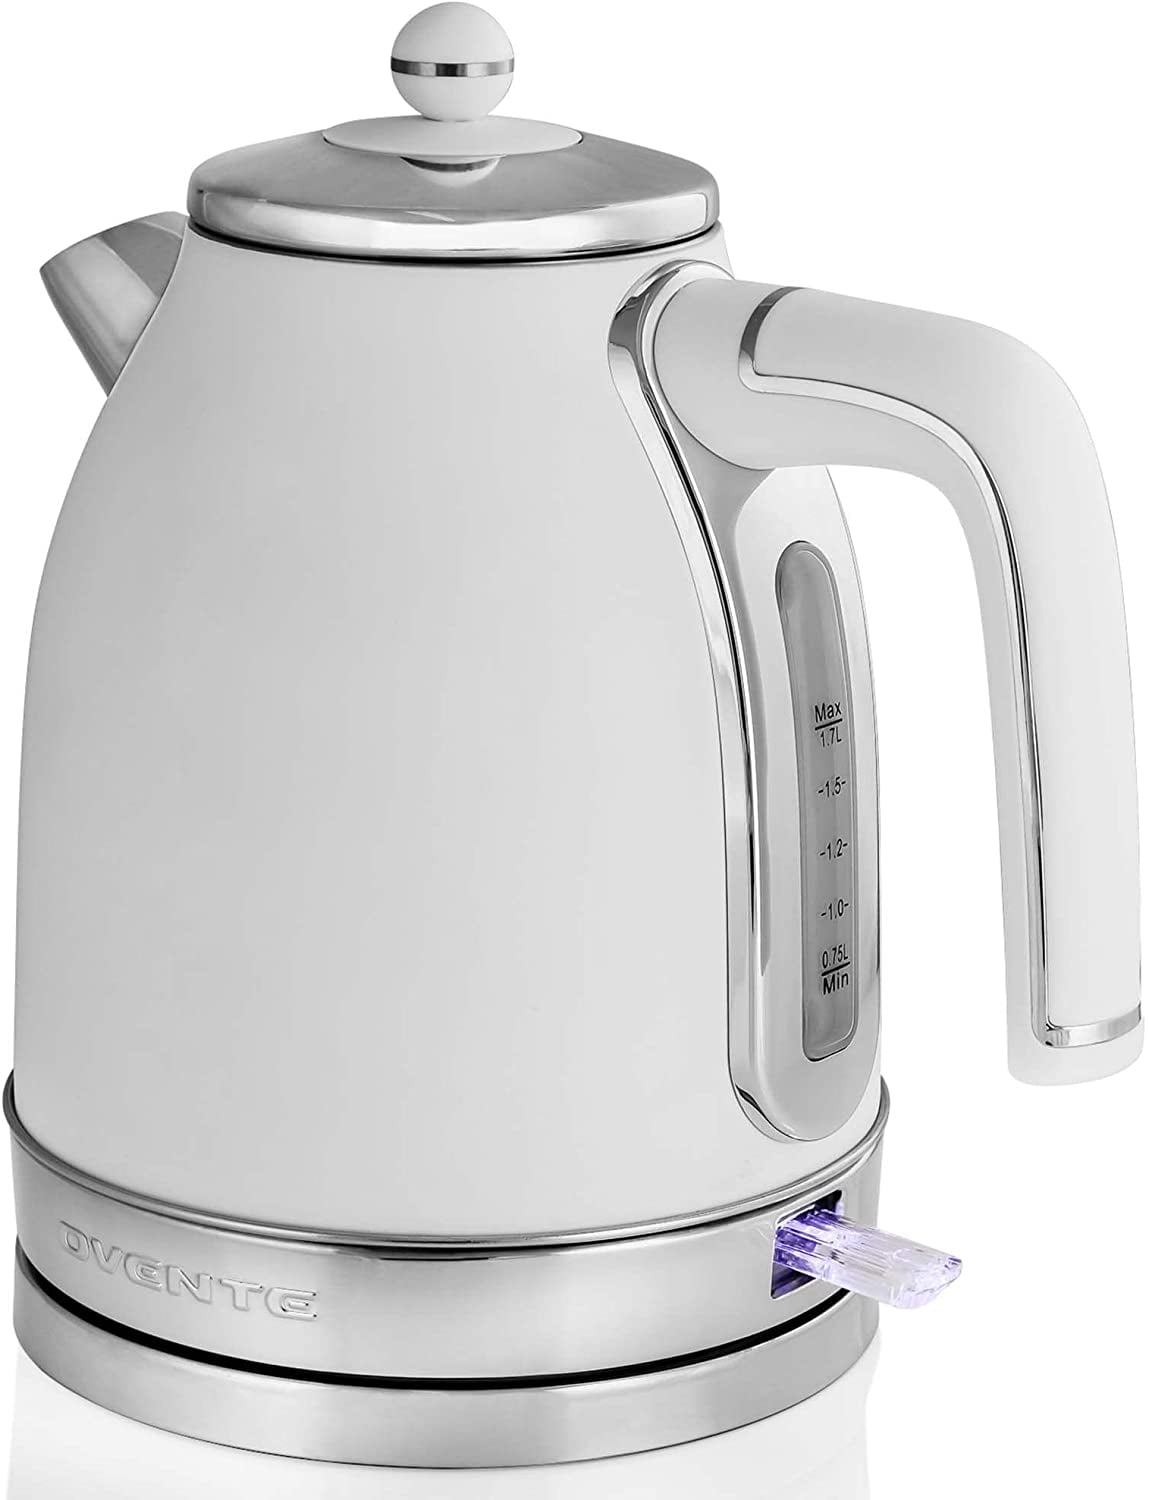 OVENTE 7-Cup White Stainless Steel BPA-Free Electric Kettle with